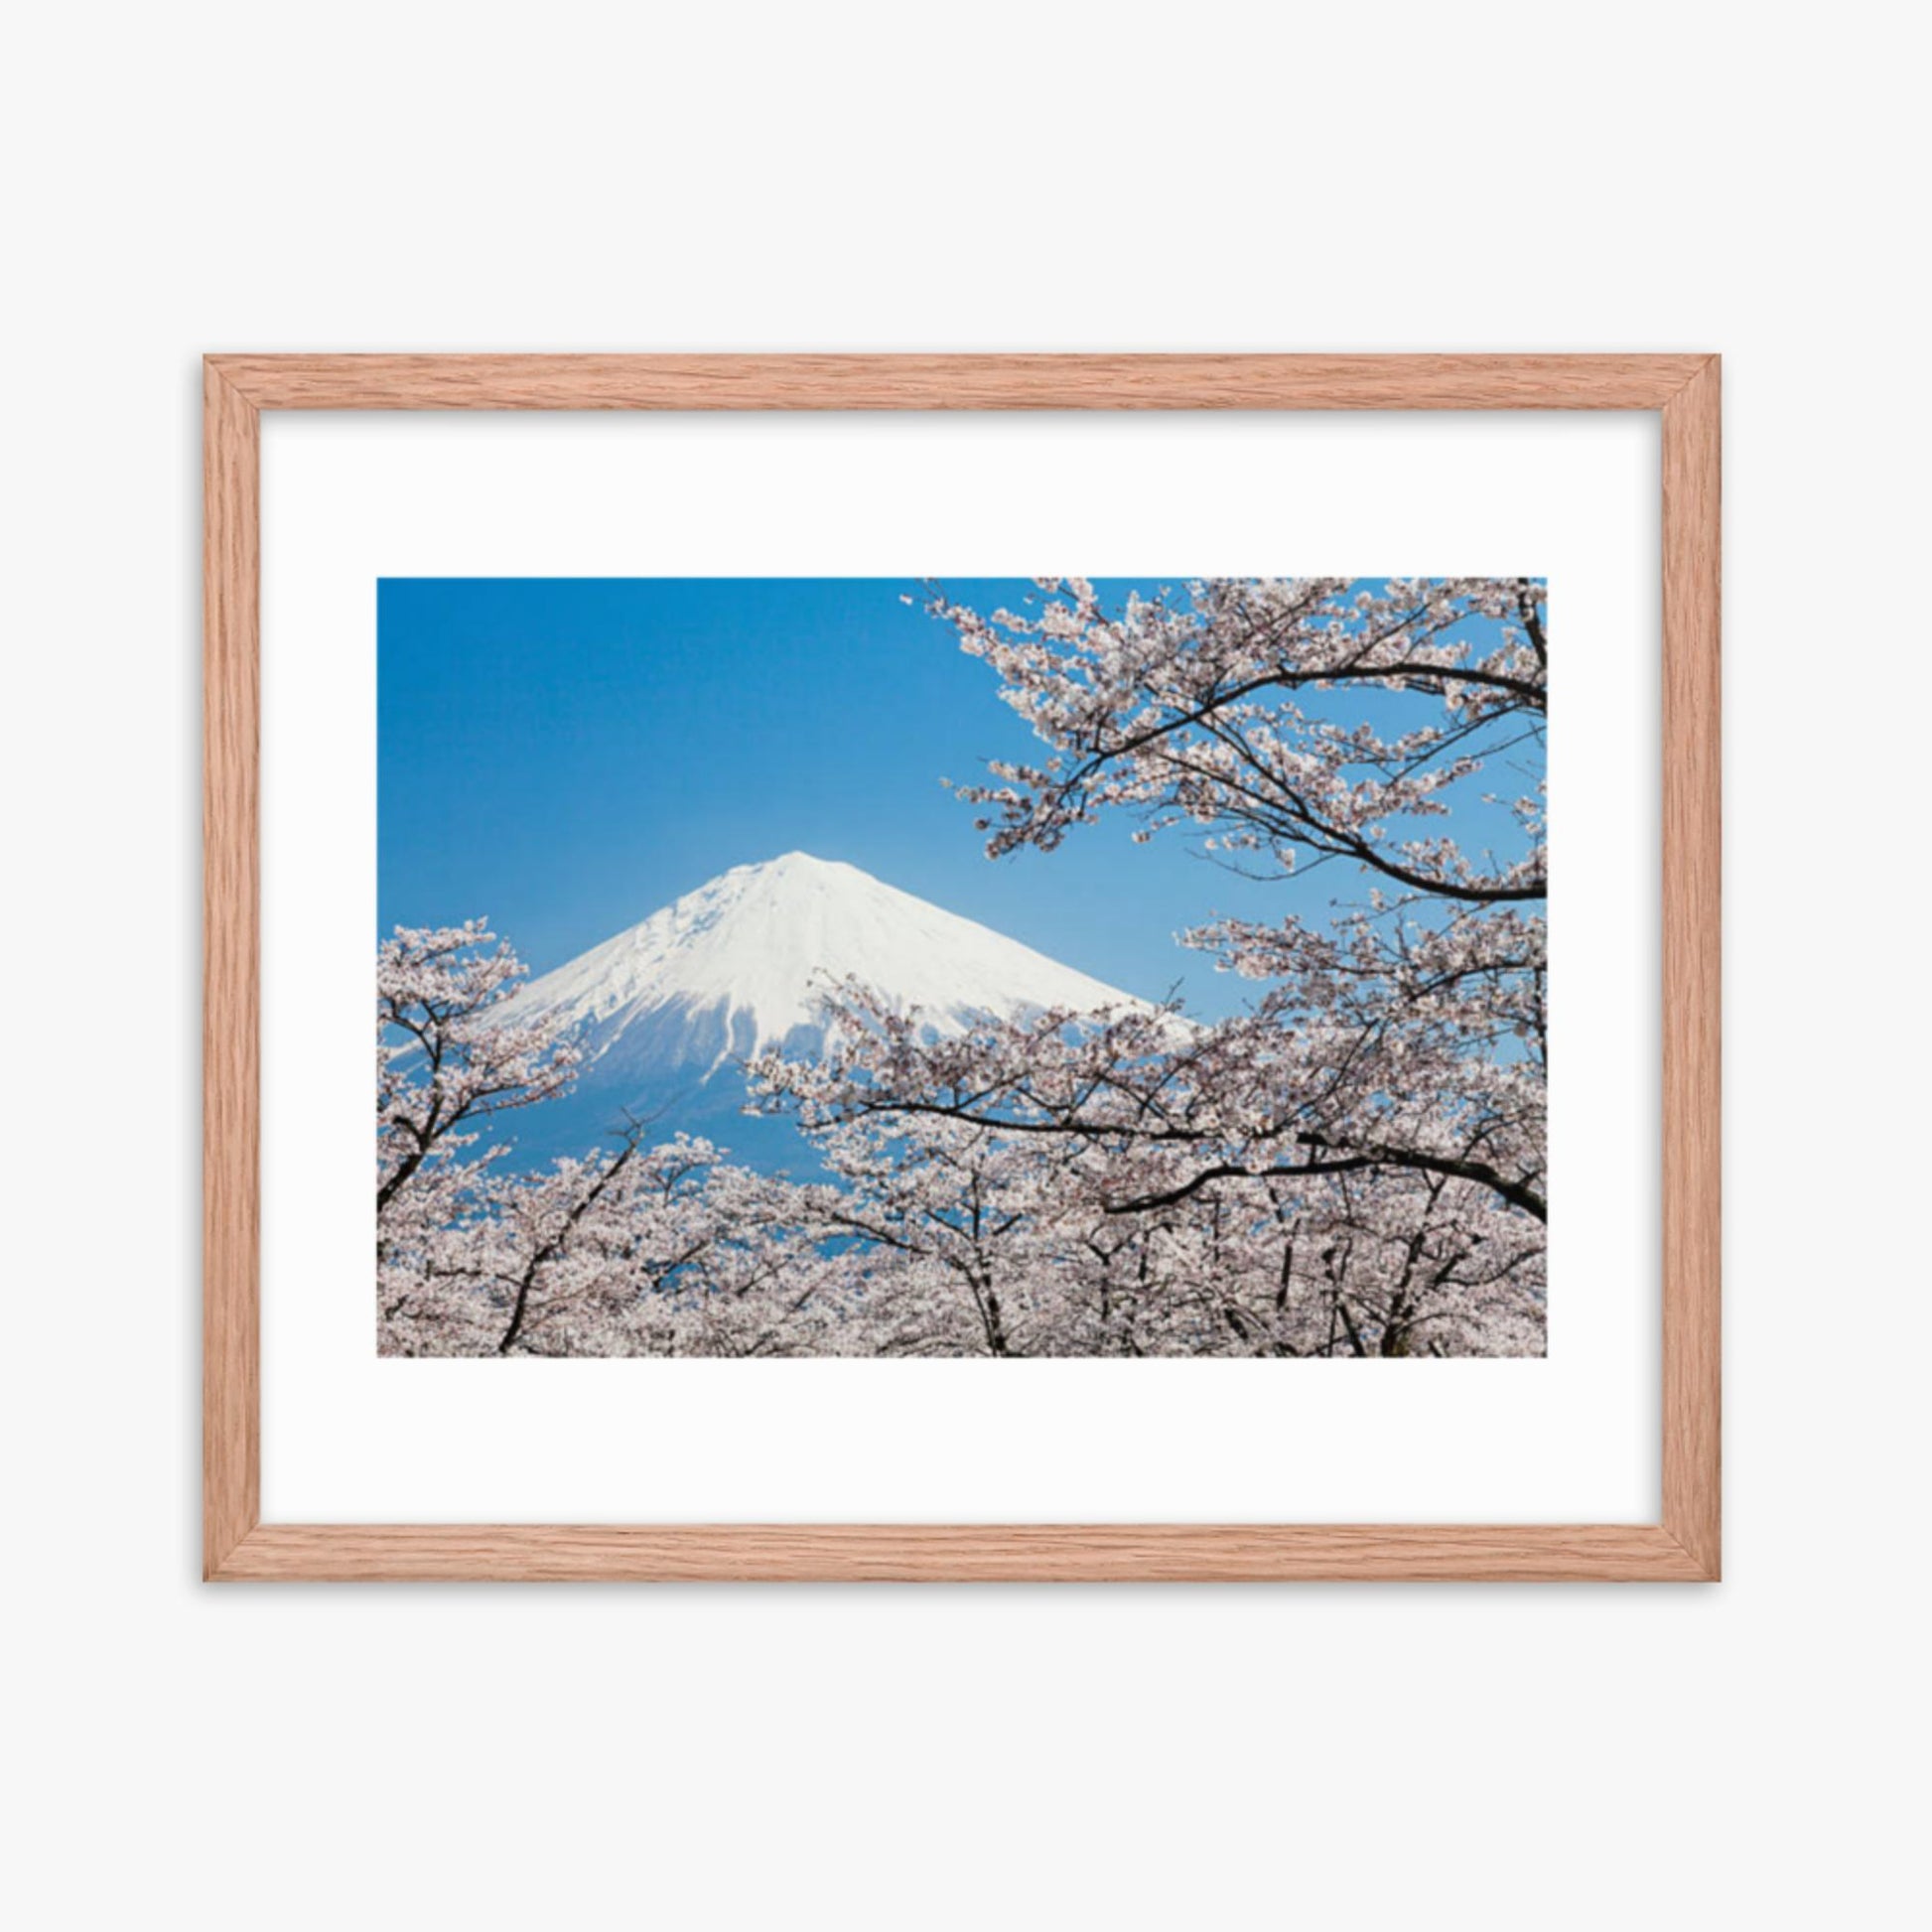 Mount Fuji & Cherry Blossoms 16x20 in Poster With Oak Frame